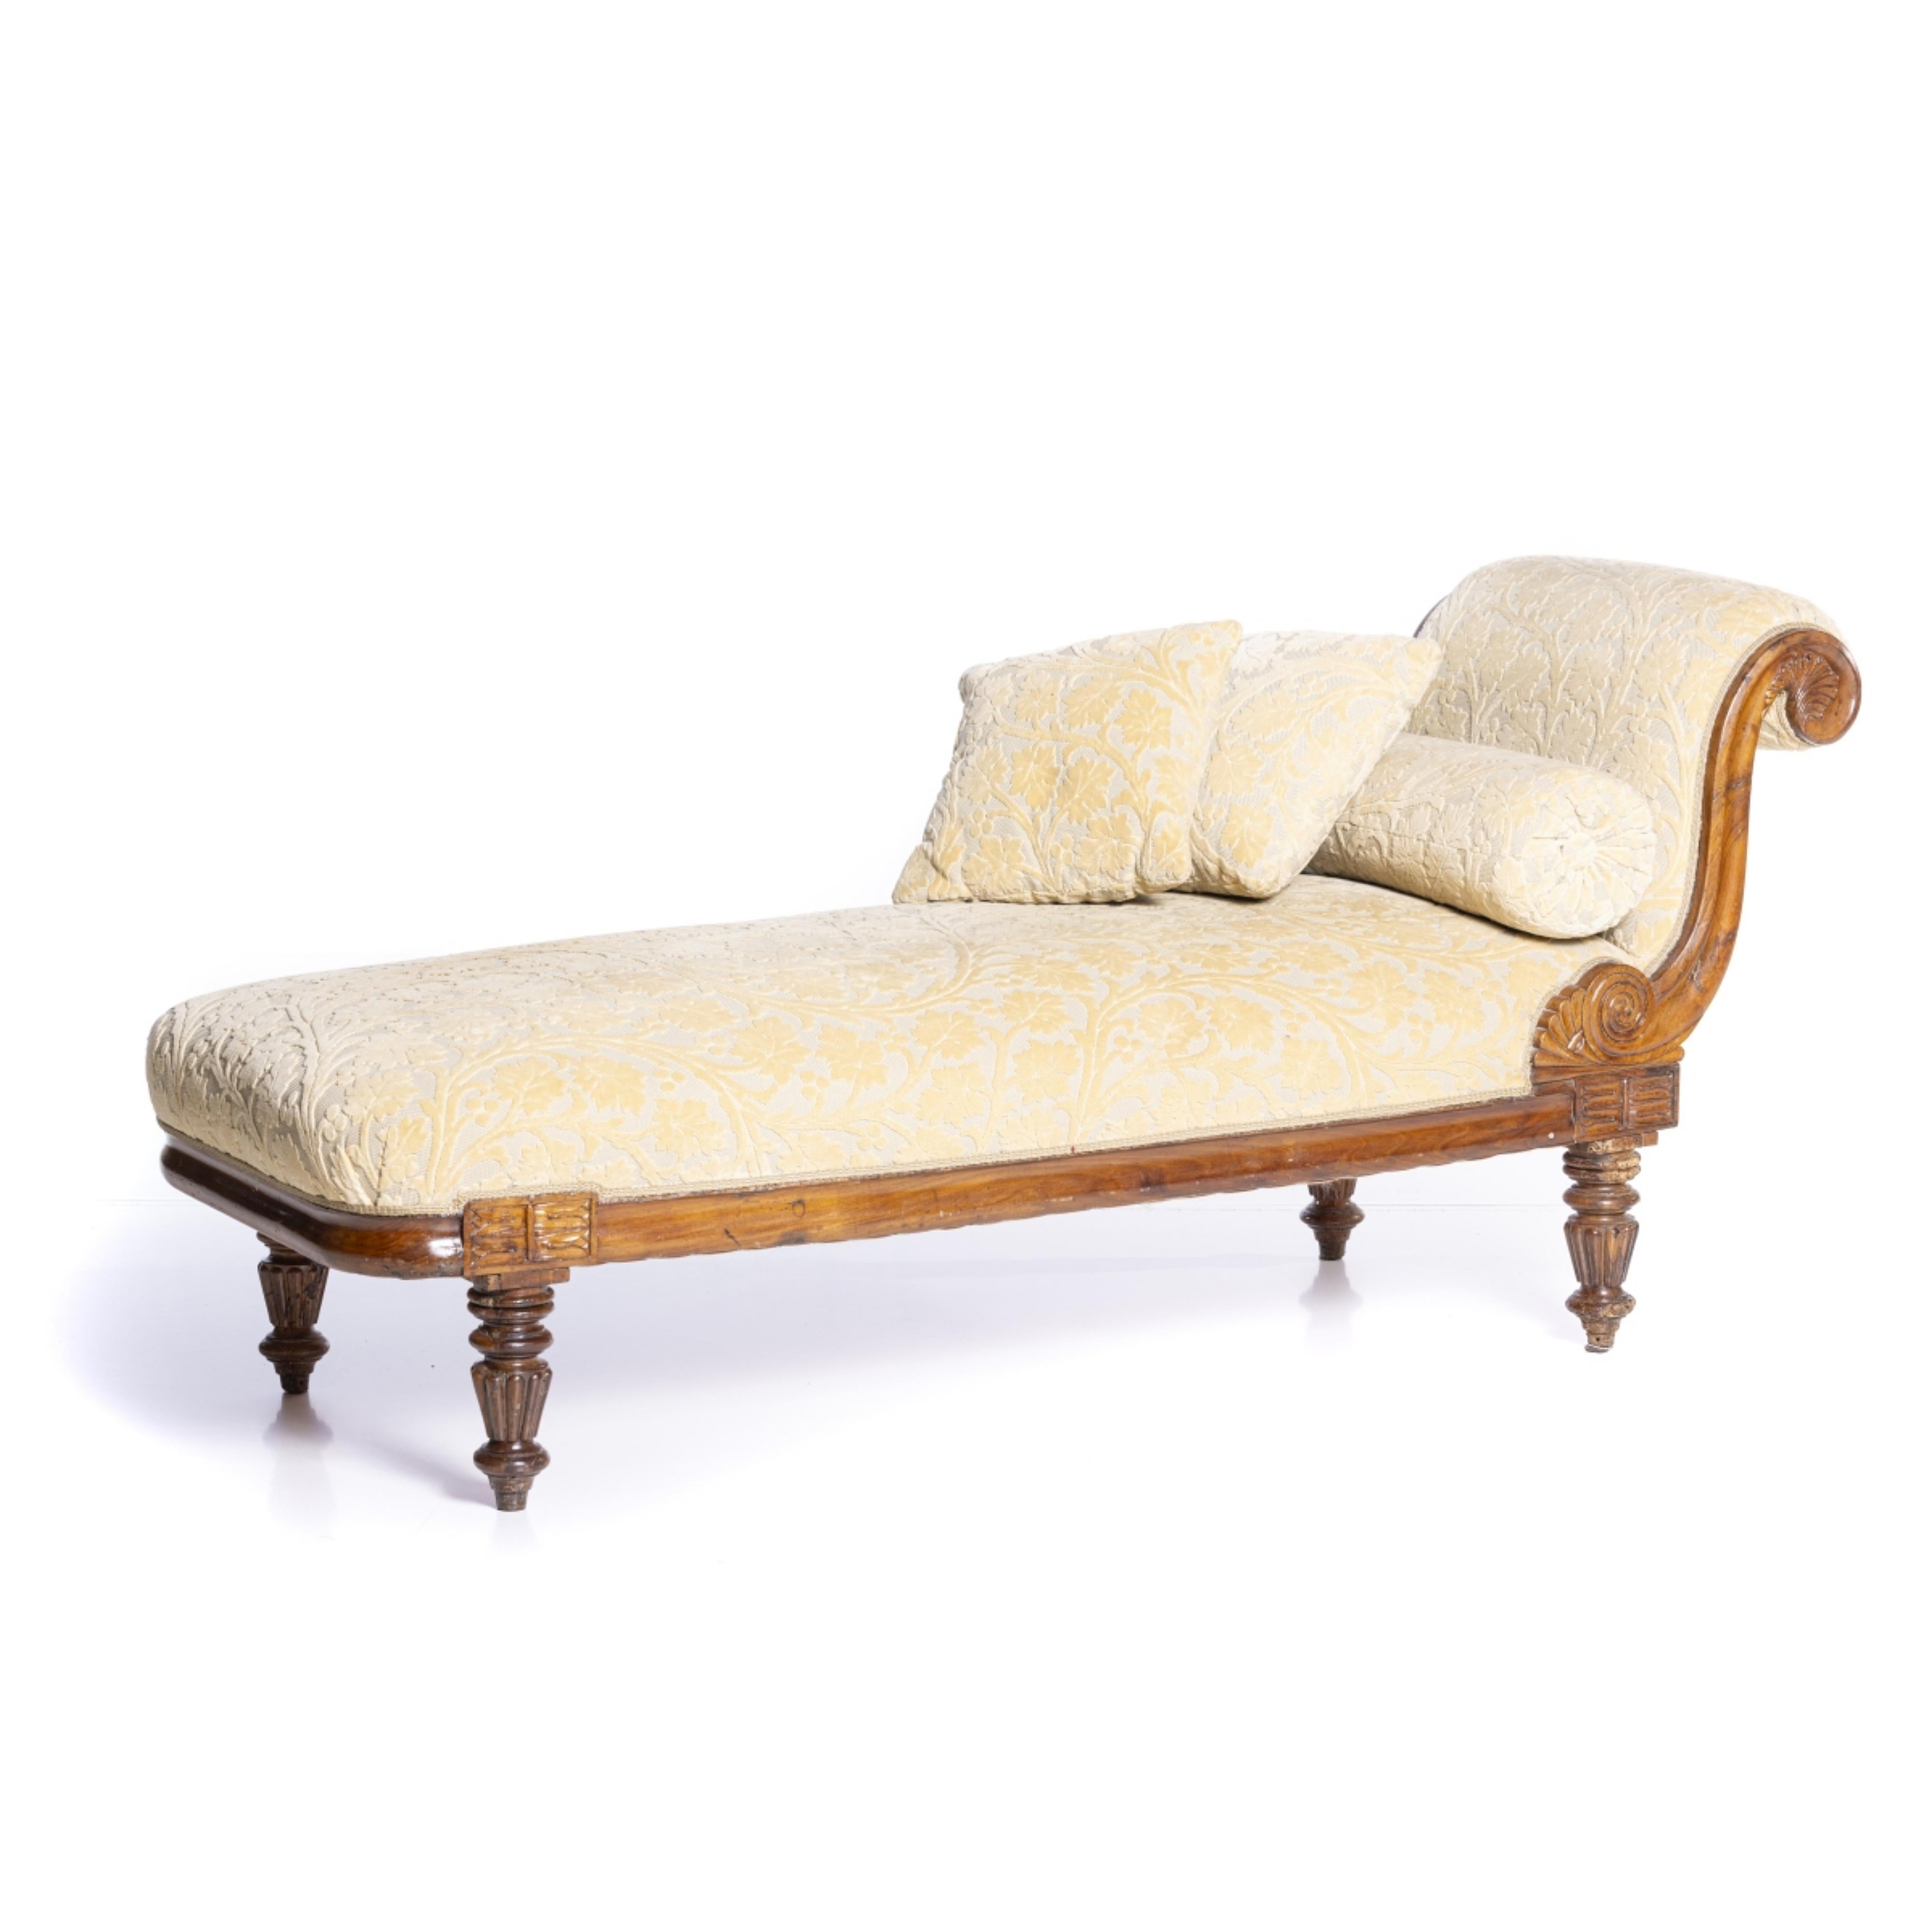 Hand-Crafted CHAISE LONGUE  Portuguese, from the 19th Century